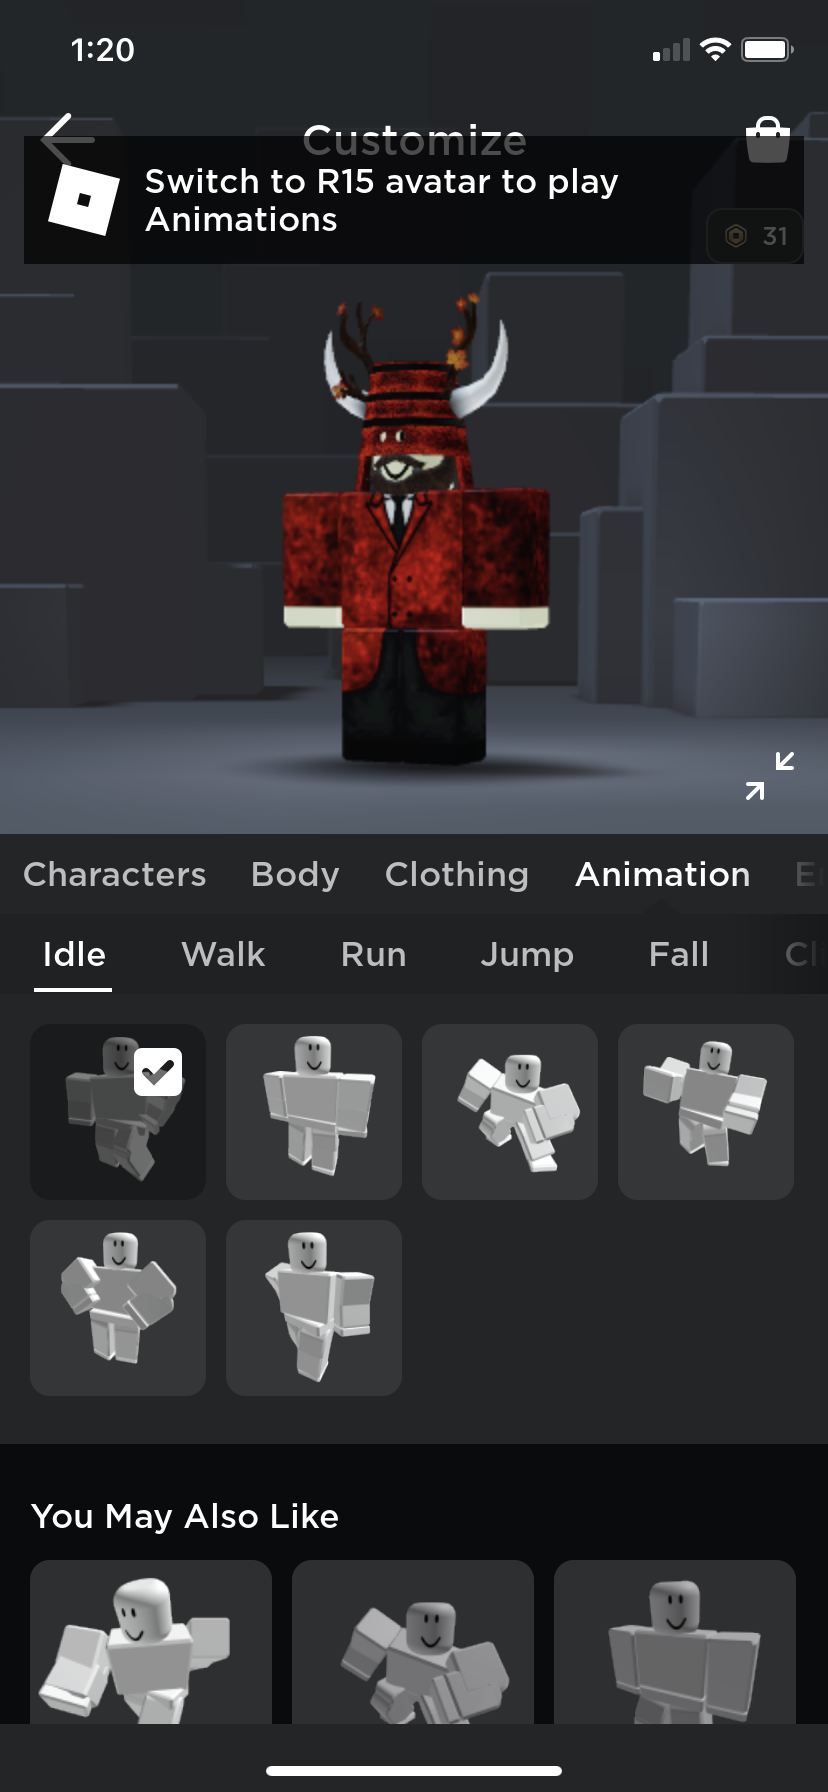 Trading - Trading 43 MM2 Godlys for a good roblox account or idv account -  EpicNPC